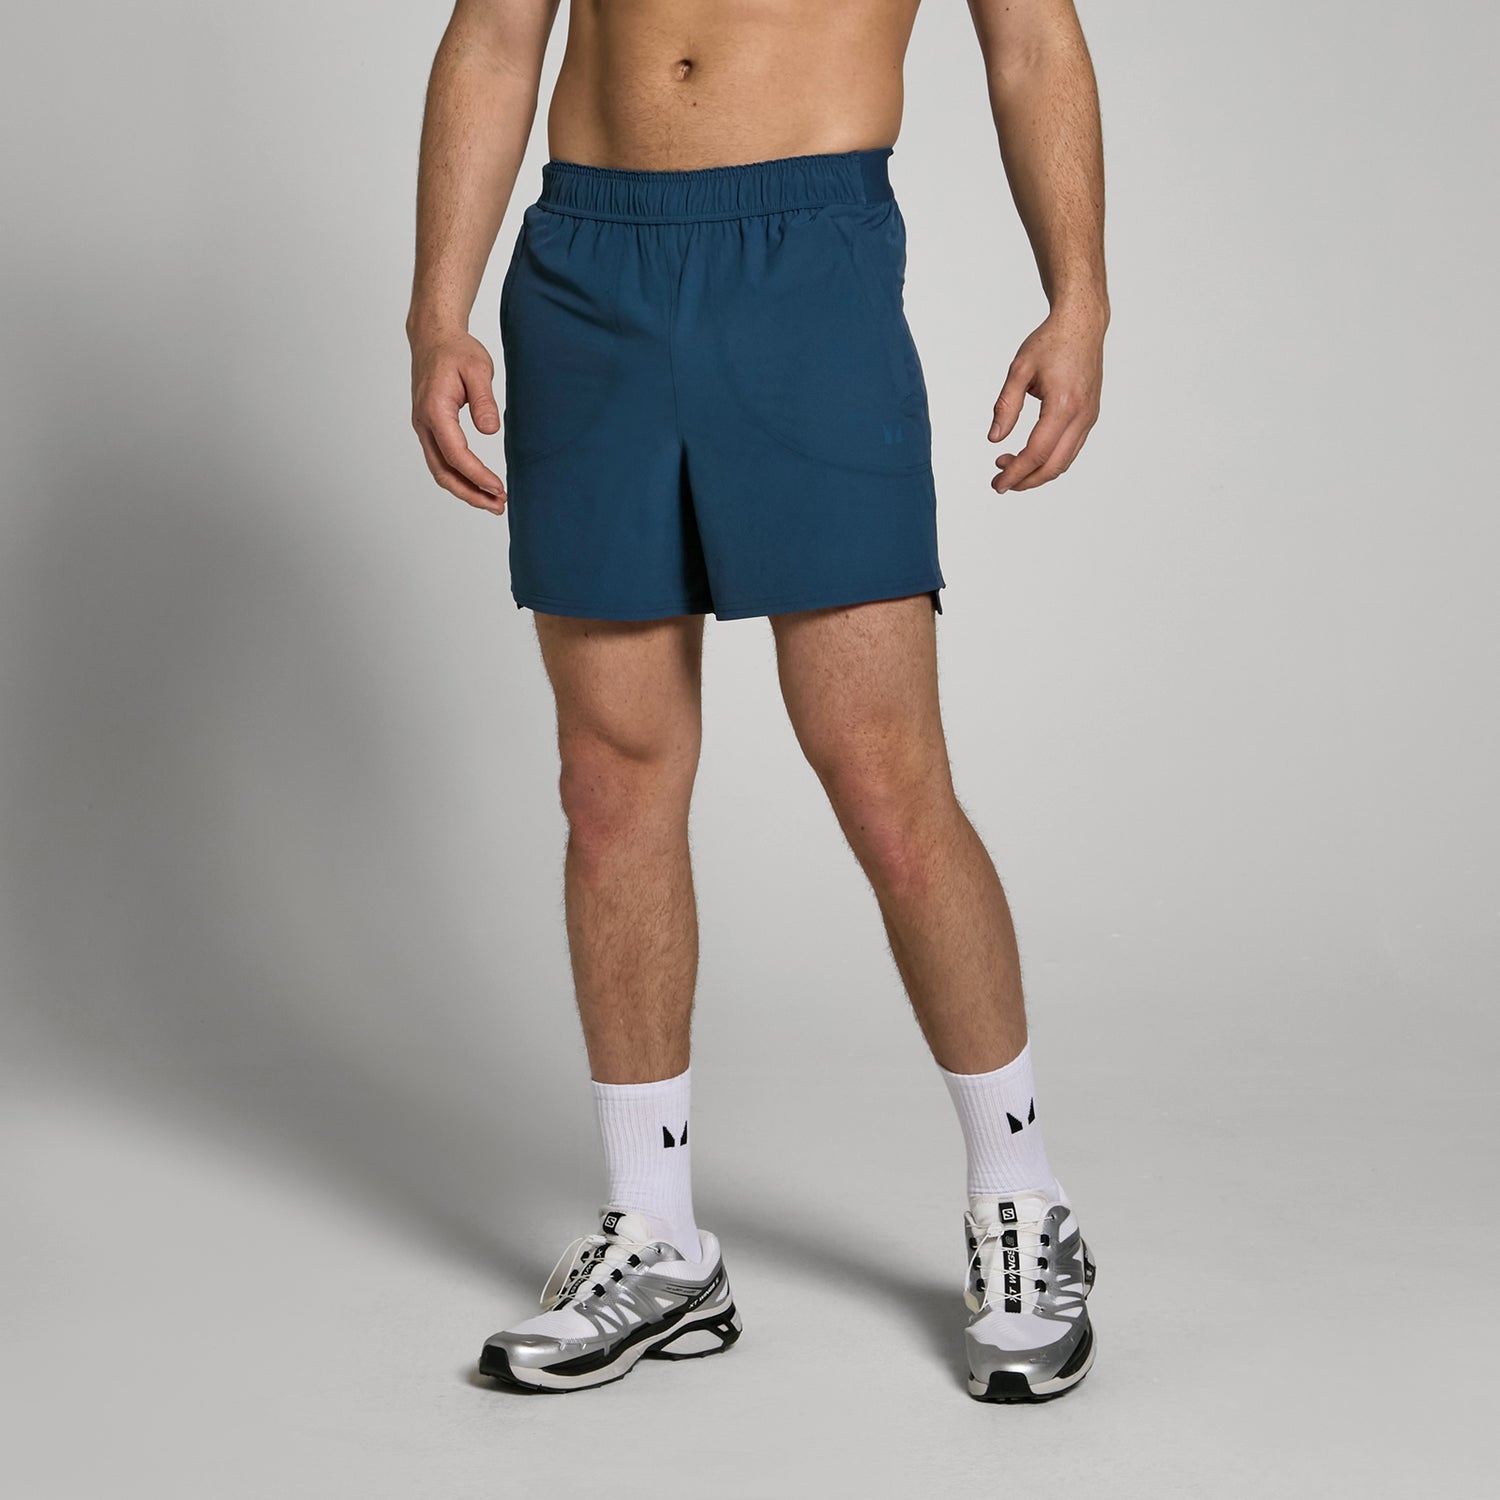 MP Men's Tempo 360 Shorts - Washed Navy - XS